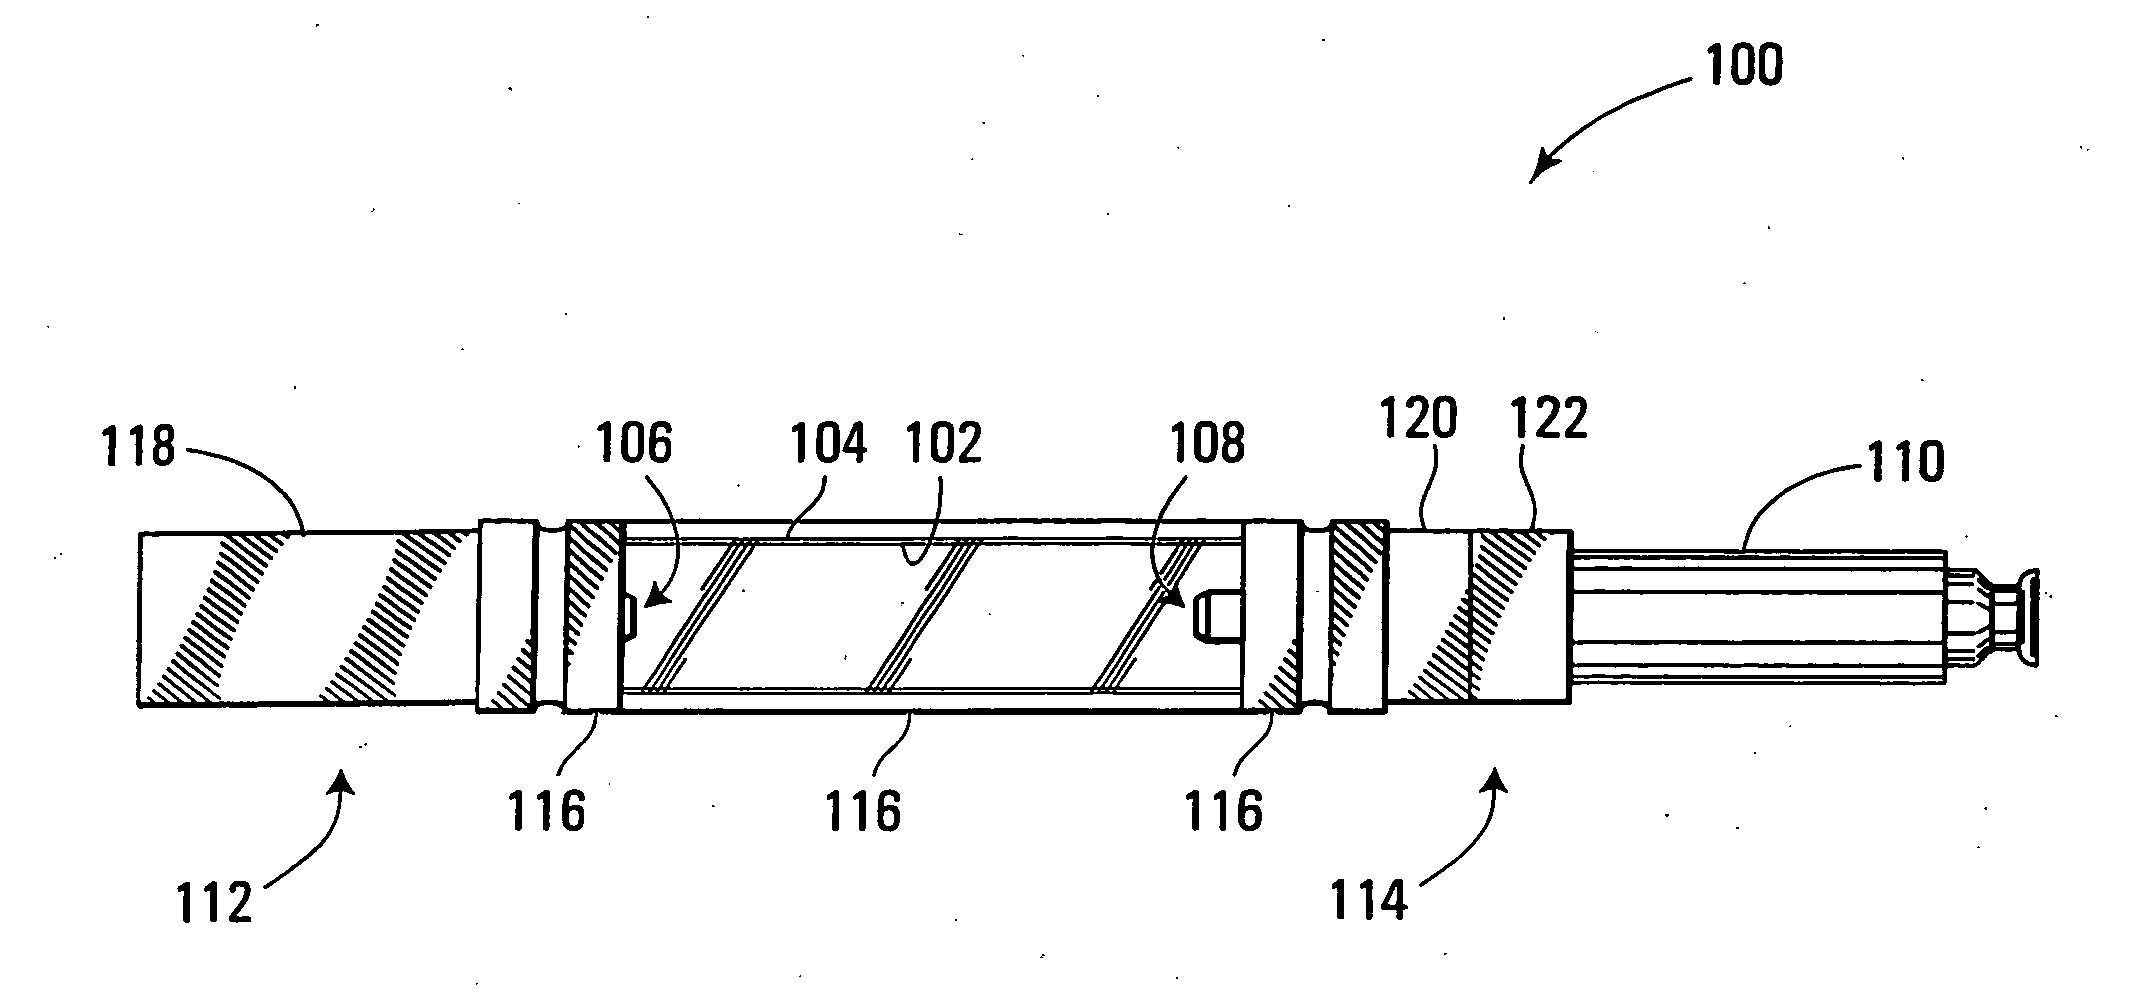 High-intensity electromagnetic radiation apparatus and methods